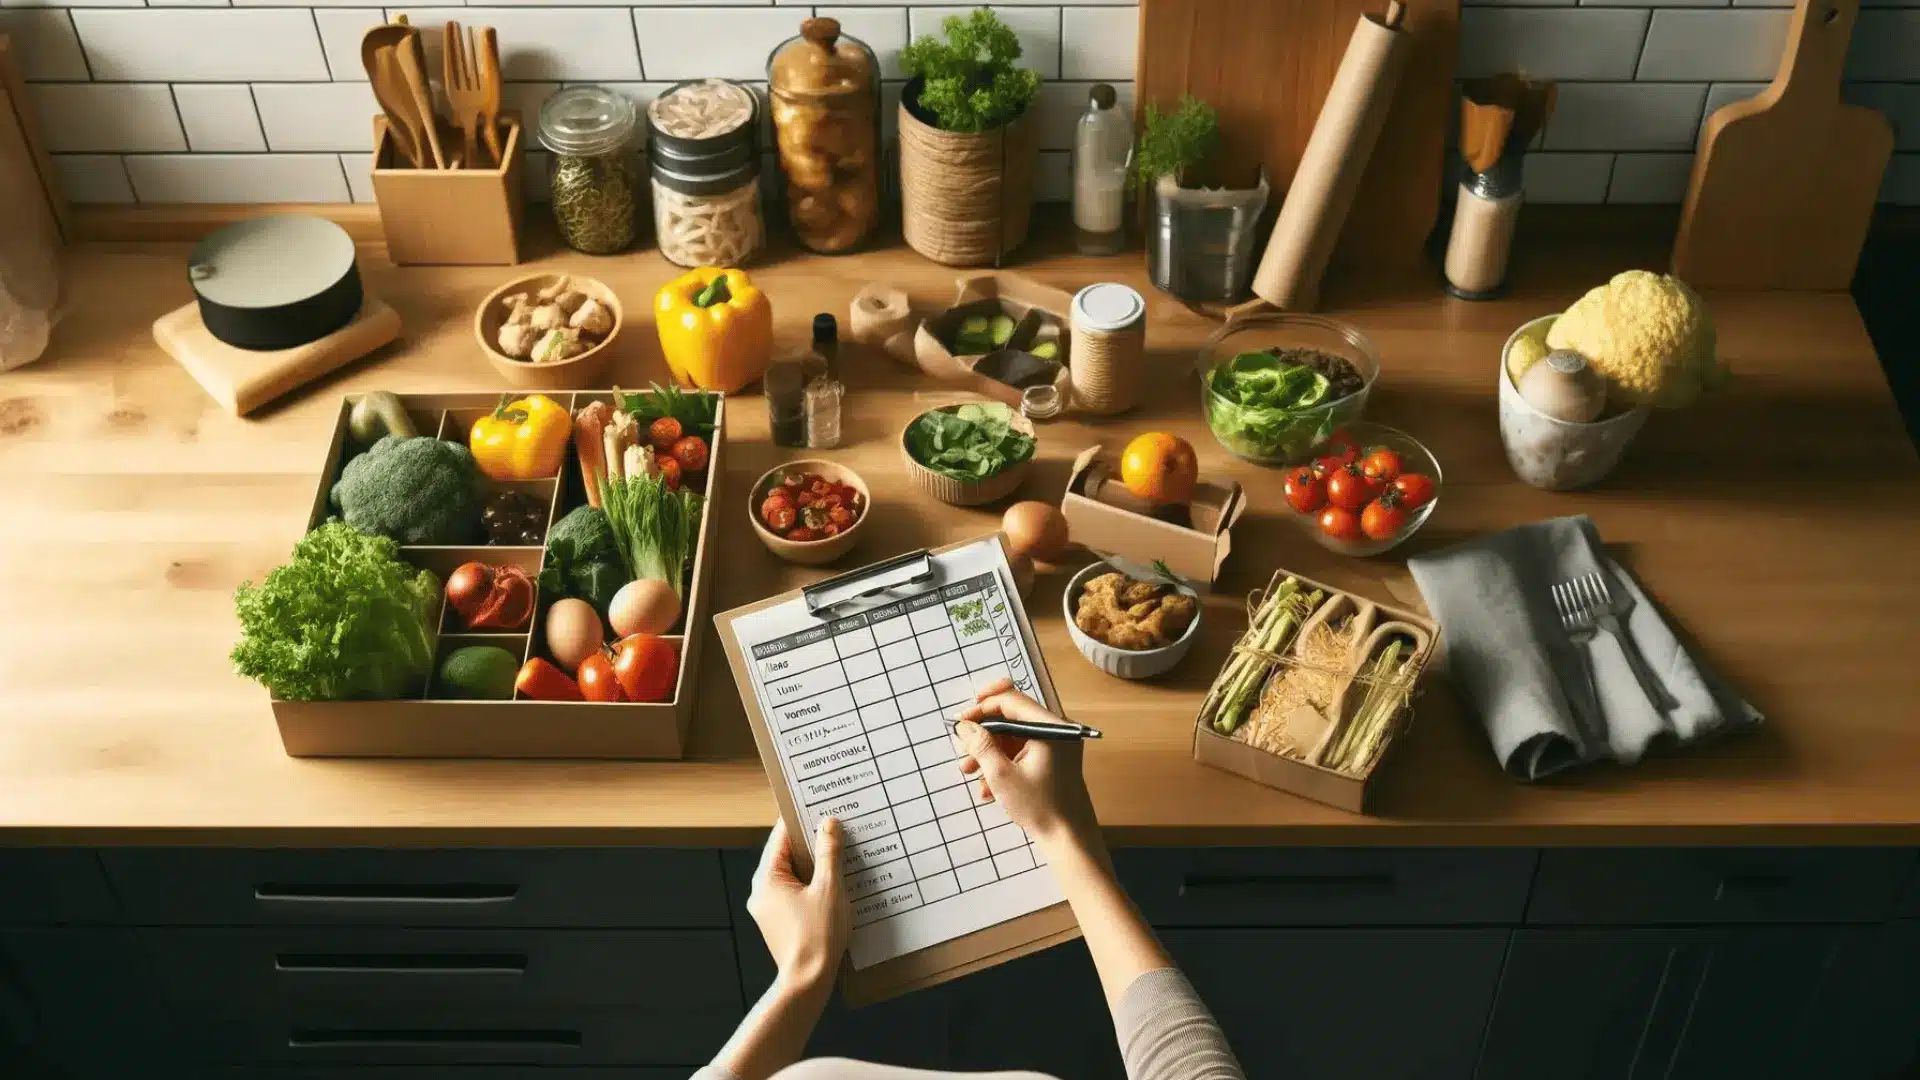 Planning meals in a home kitchen to ensure no food goes to waste, with ingredients laid out.